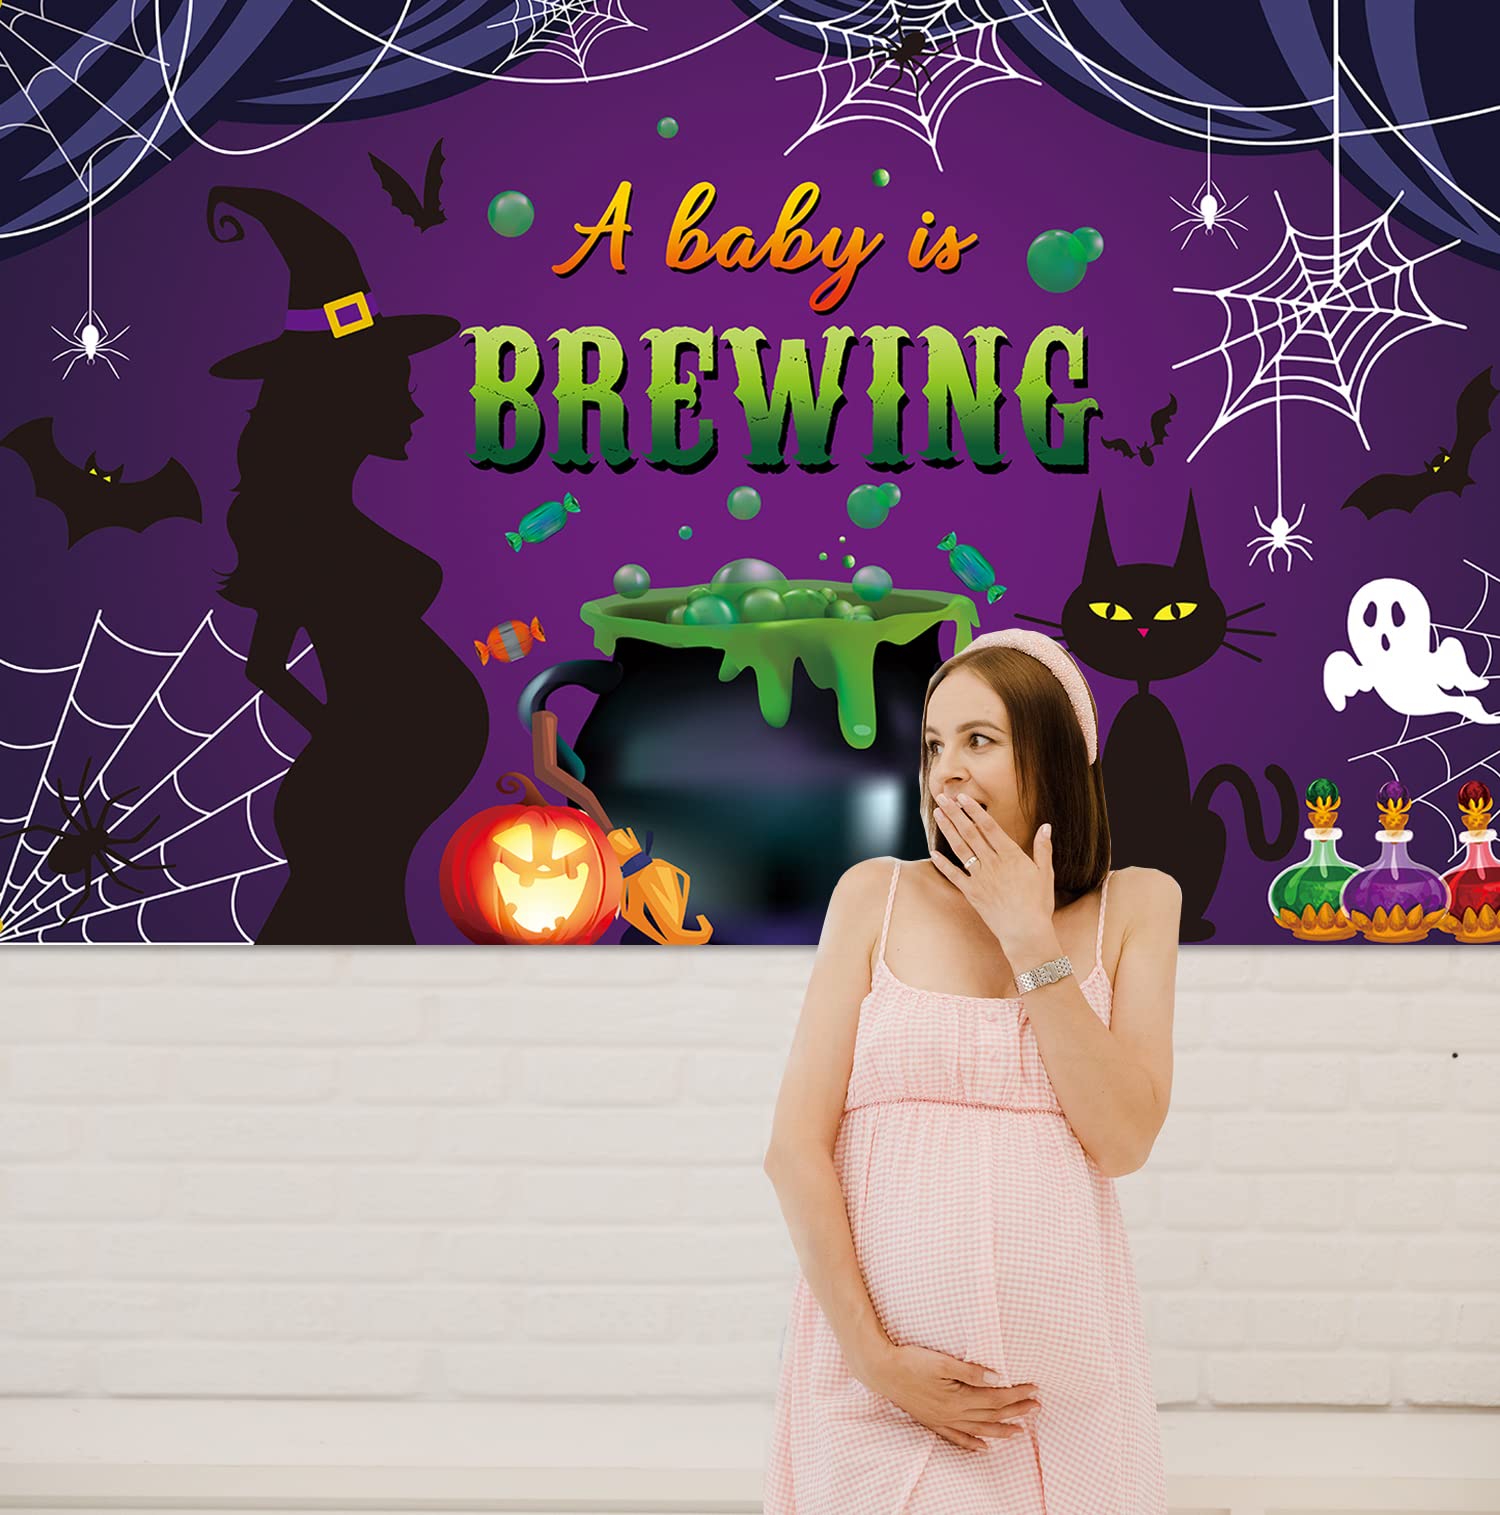 PTFNY Halloween A Baby is Brewing Backdrop Banner Halloween Baby Shower Decorations for Baby Shower Costume Birthday Party Supplies Decorations Banner Photo Booth Props Gender Reveal Party Supplies